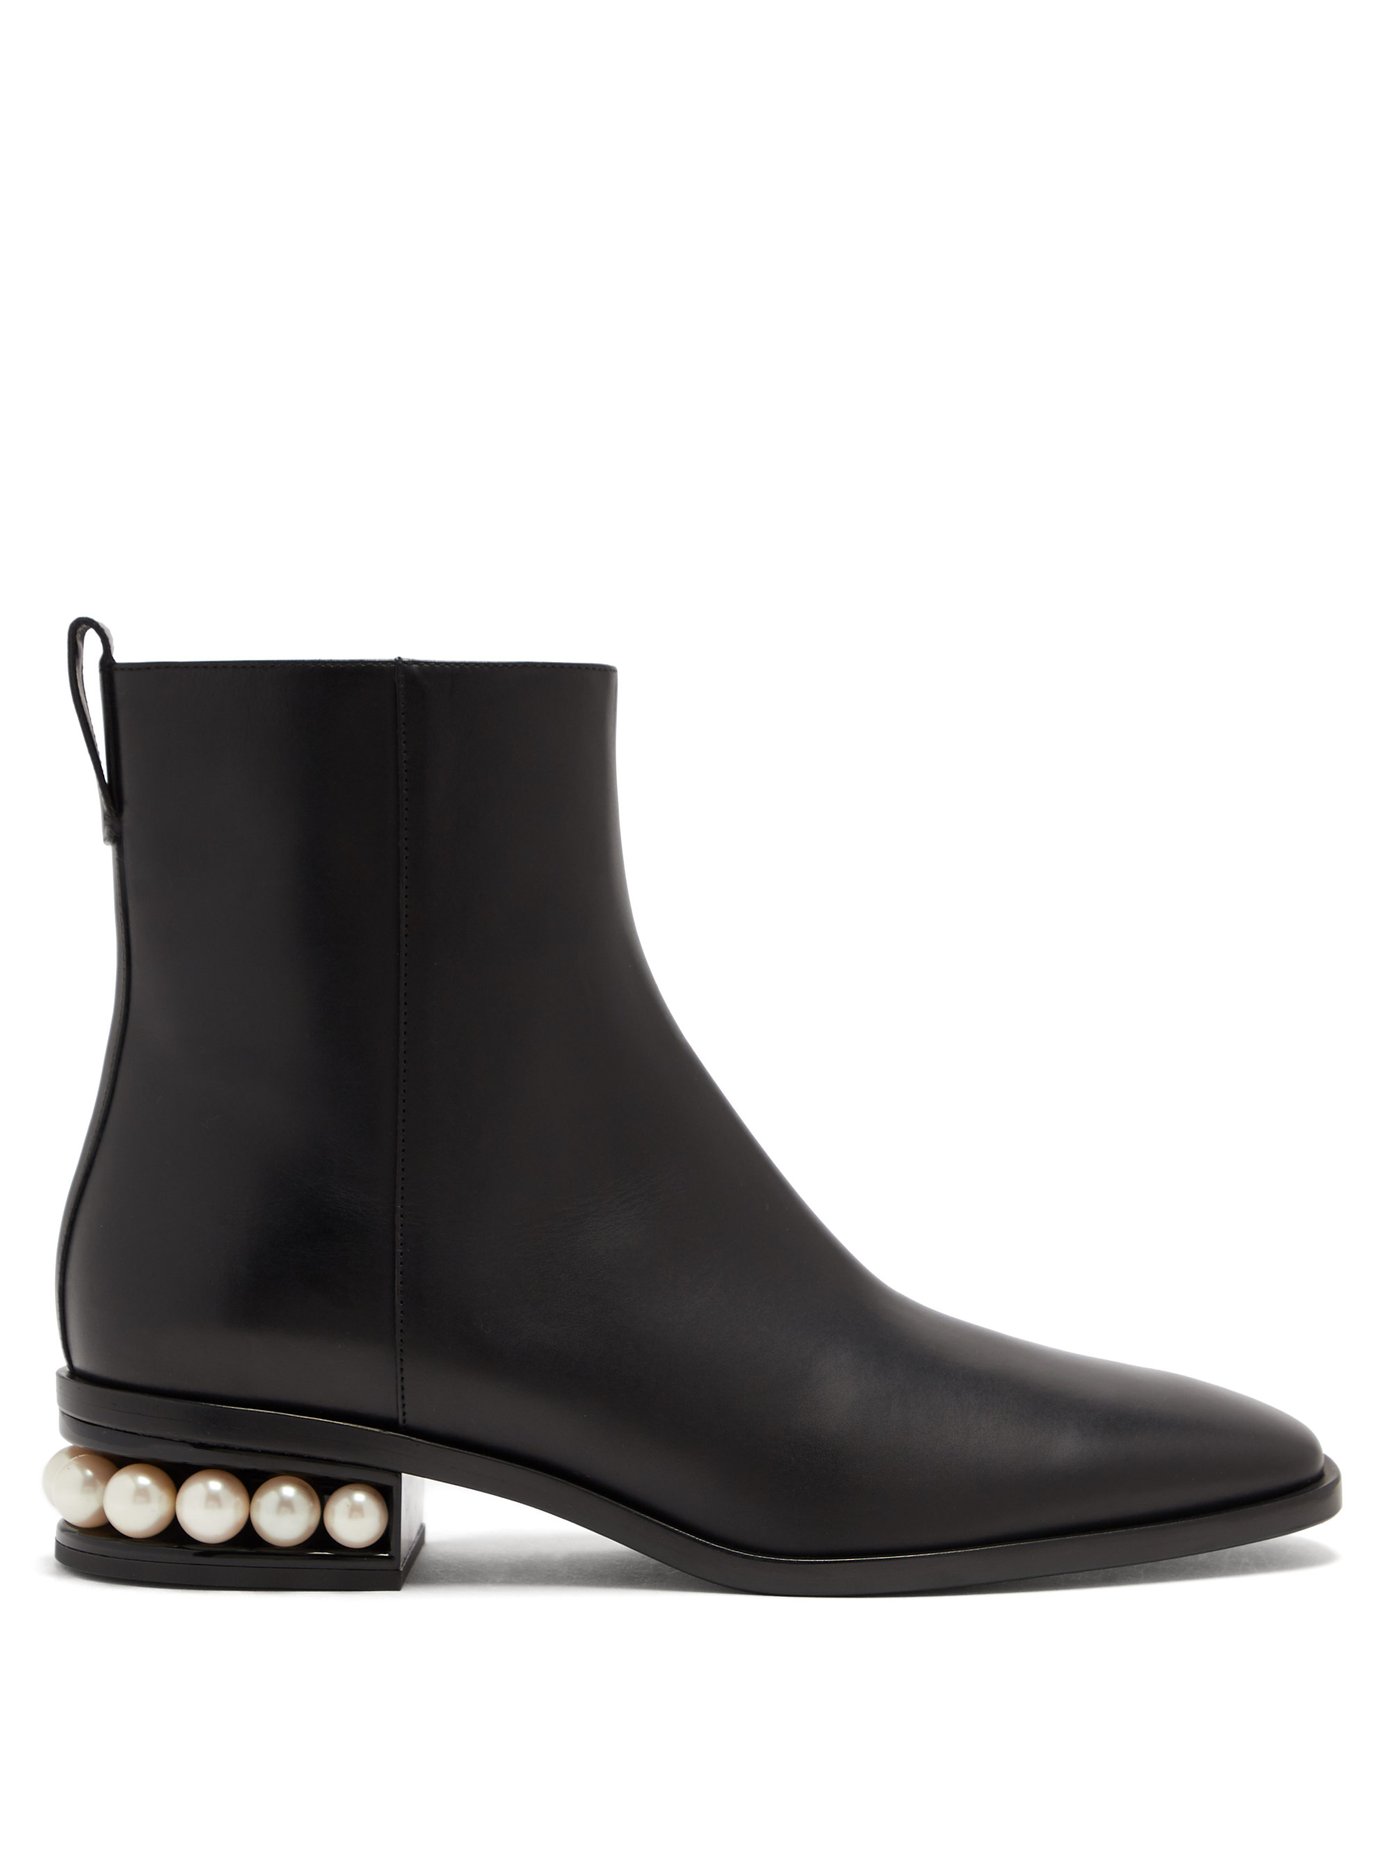 Casati pearl-heel leather ankle boots 